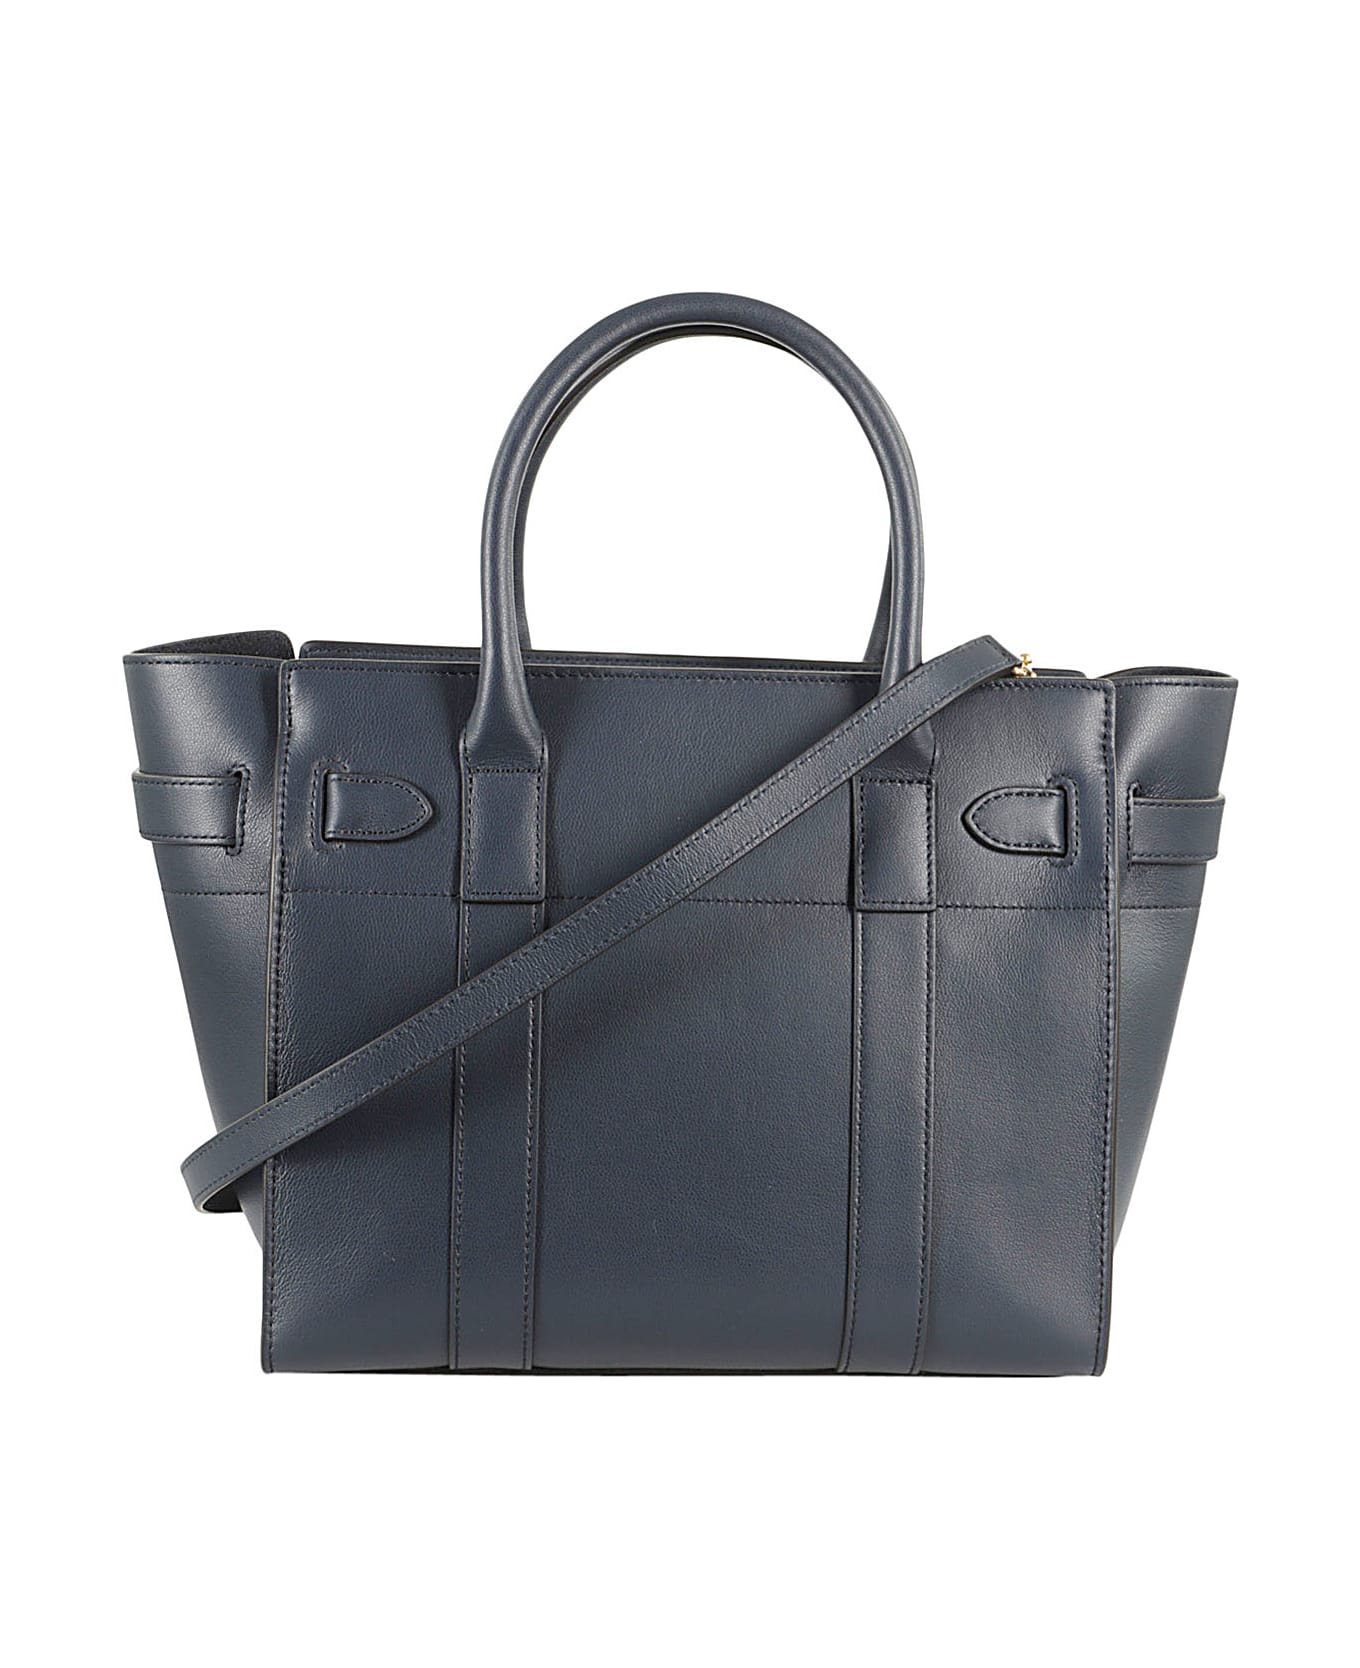 Mulberry Small Zipped Bayswater - Night Sky トートバッグ